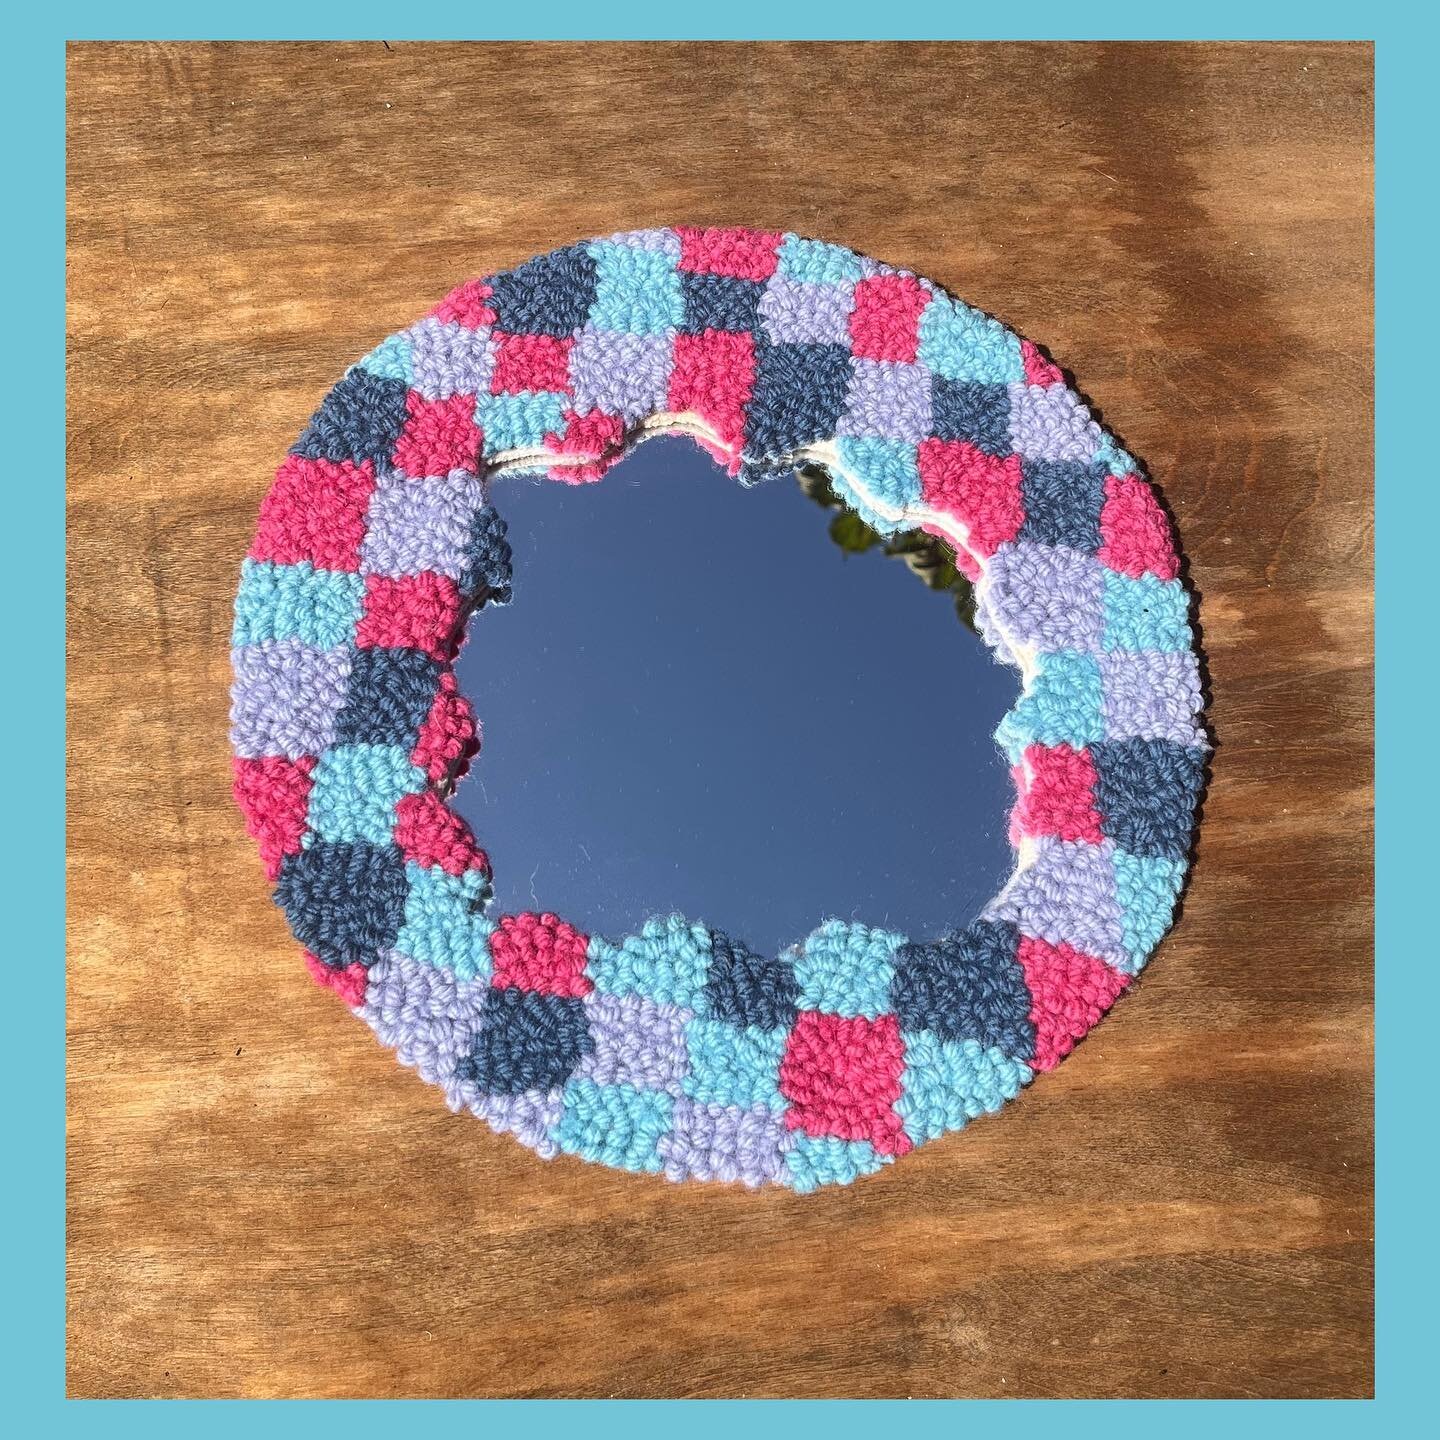 Checkered mirror frame in sweet pastels. Sold 💝

Swipe for a photo of it fresh off the frame. 

#punchneedle #punchneedlemirror #punchneedlerughooking #diy #craft #yarn #oxfordpunchneedle #storytellerwool